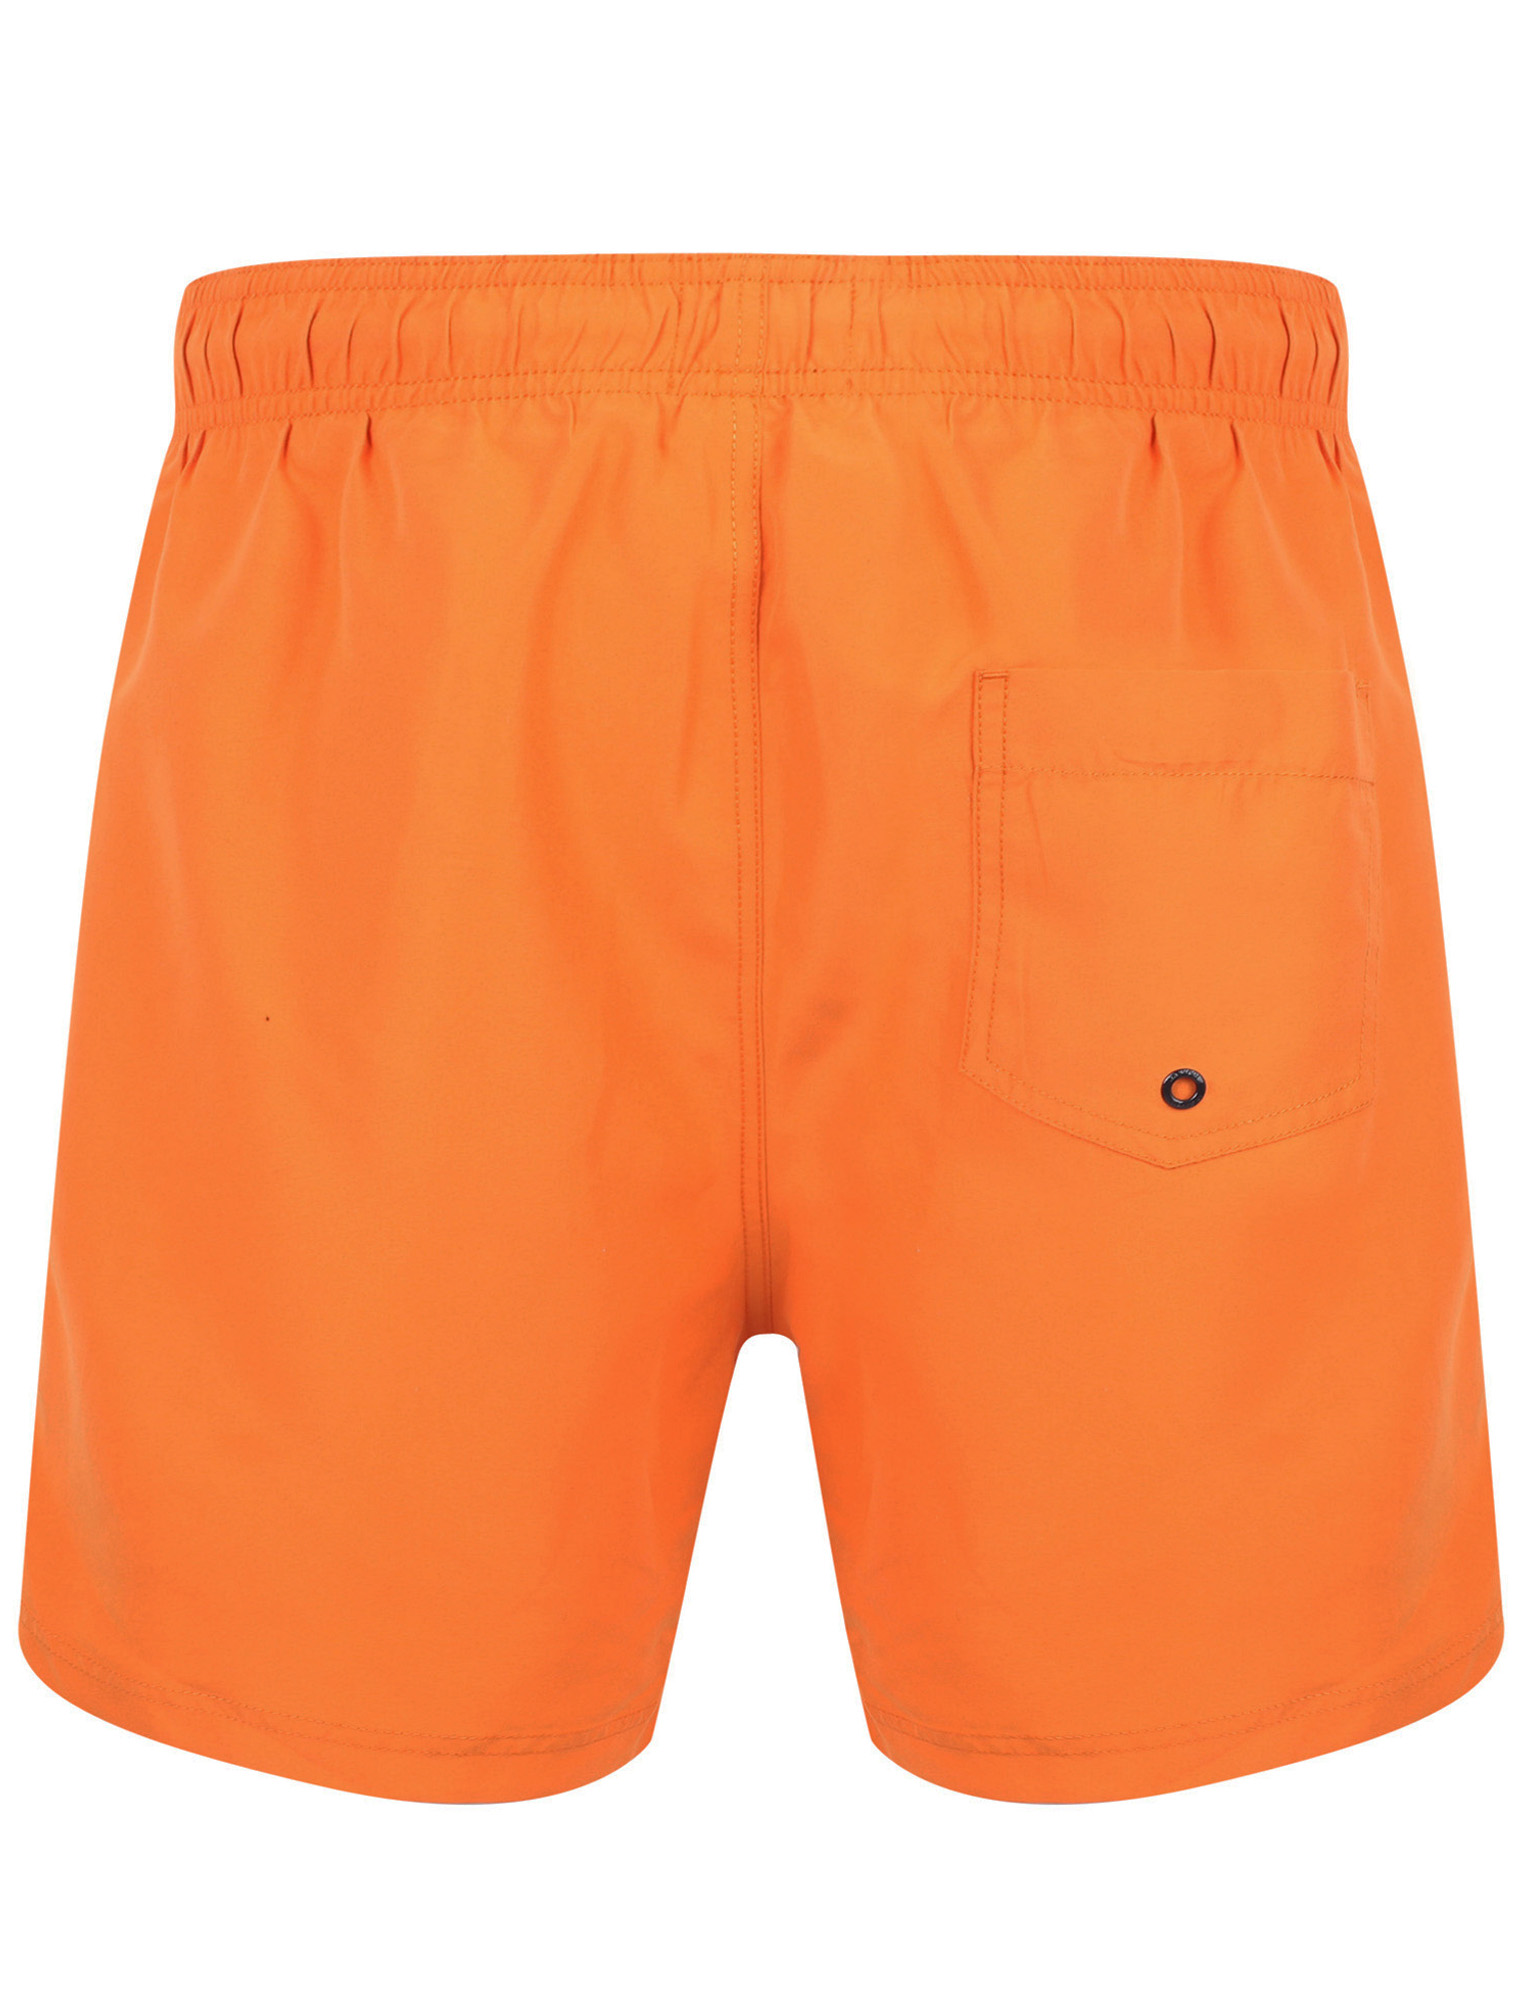 Mens Sth Shore Tokyo Laundry Graysen Lined Swim Shorts with Pockets ...